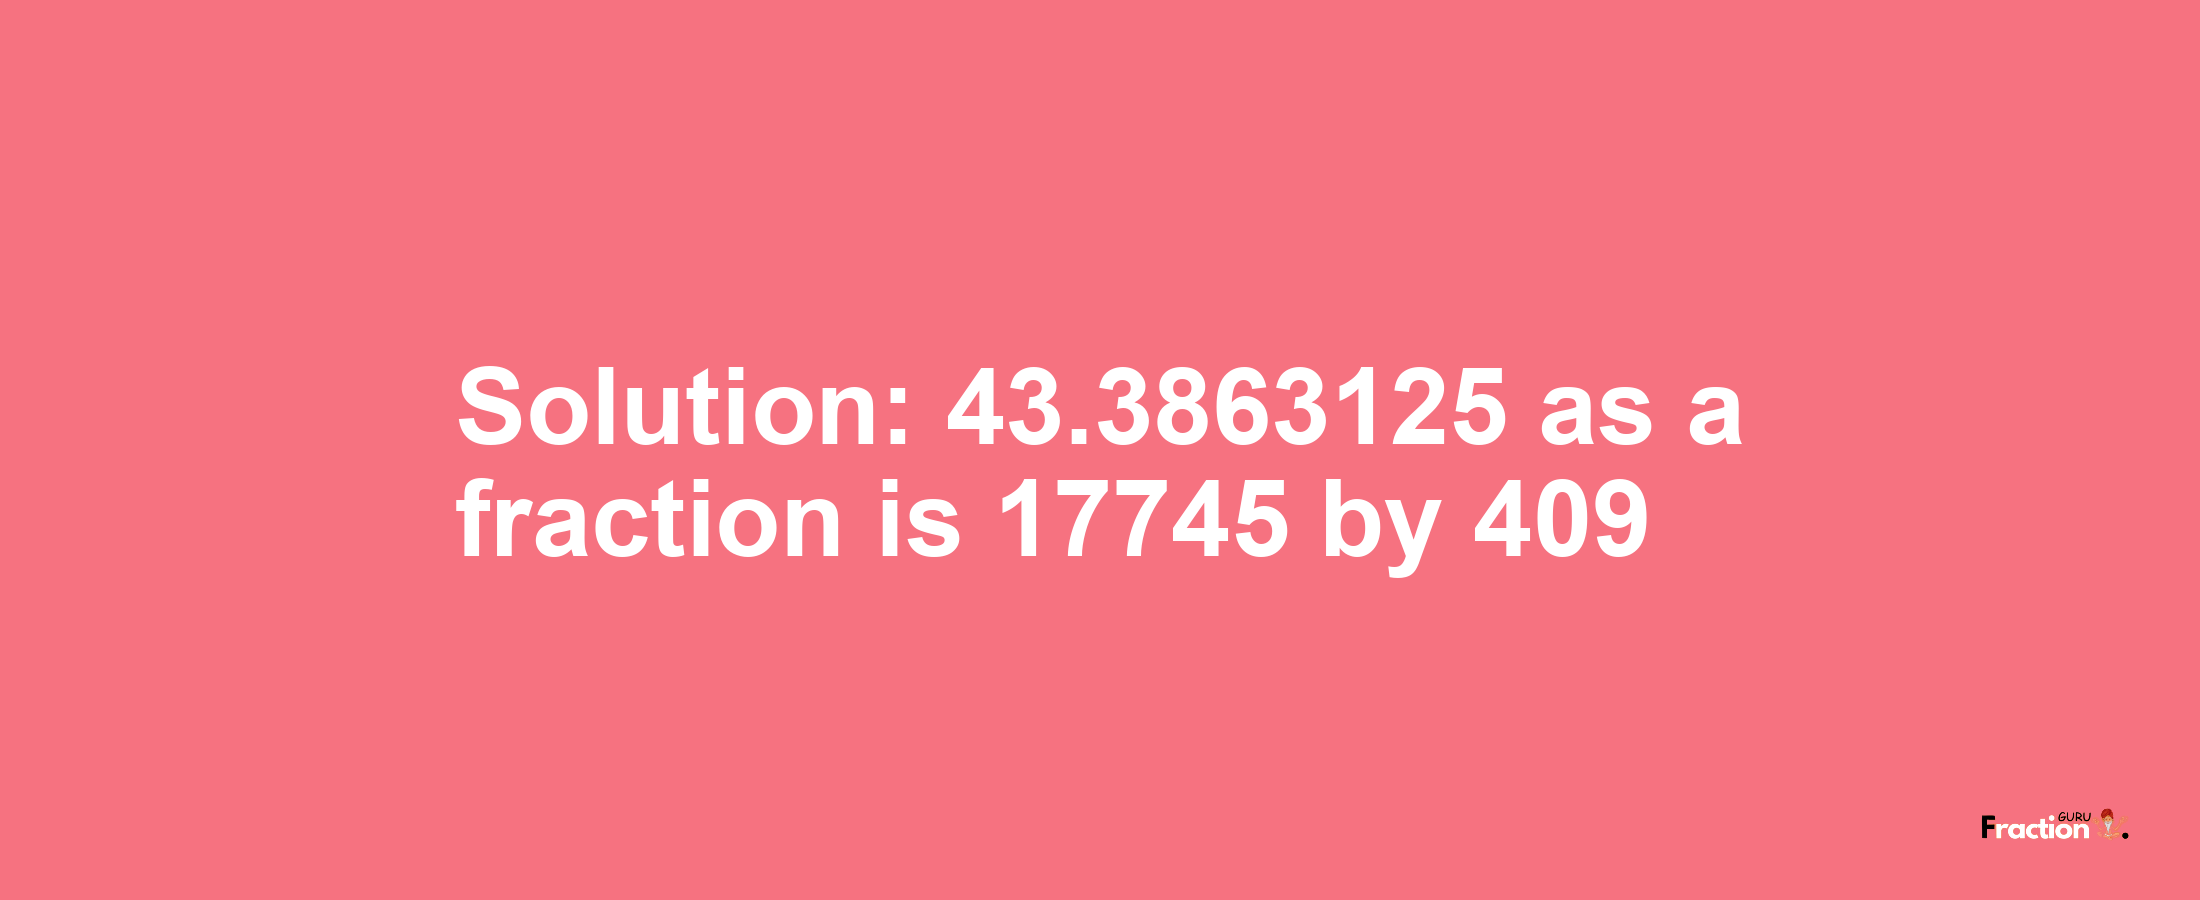 Solution:43.3863125 as a fraction is 17745/409